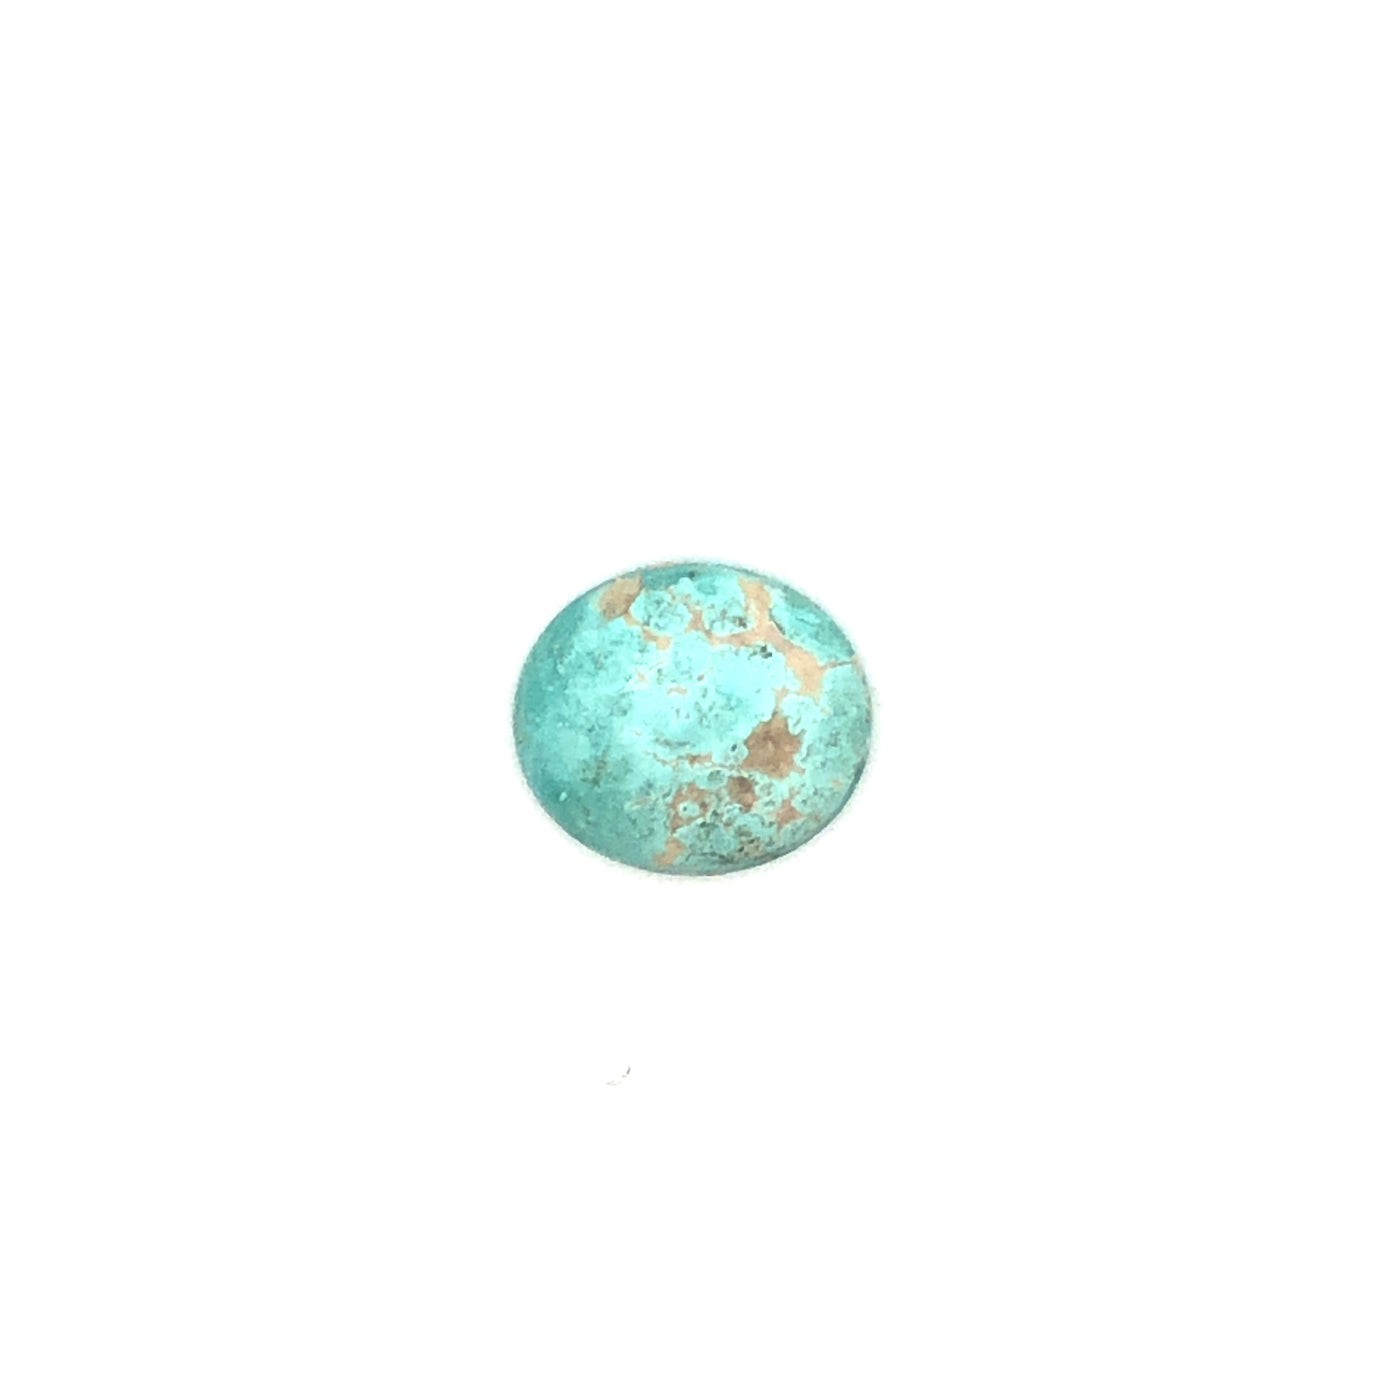 Loose Narooma Turquoise Oval Shaped 6.82Ct Blue